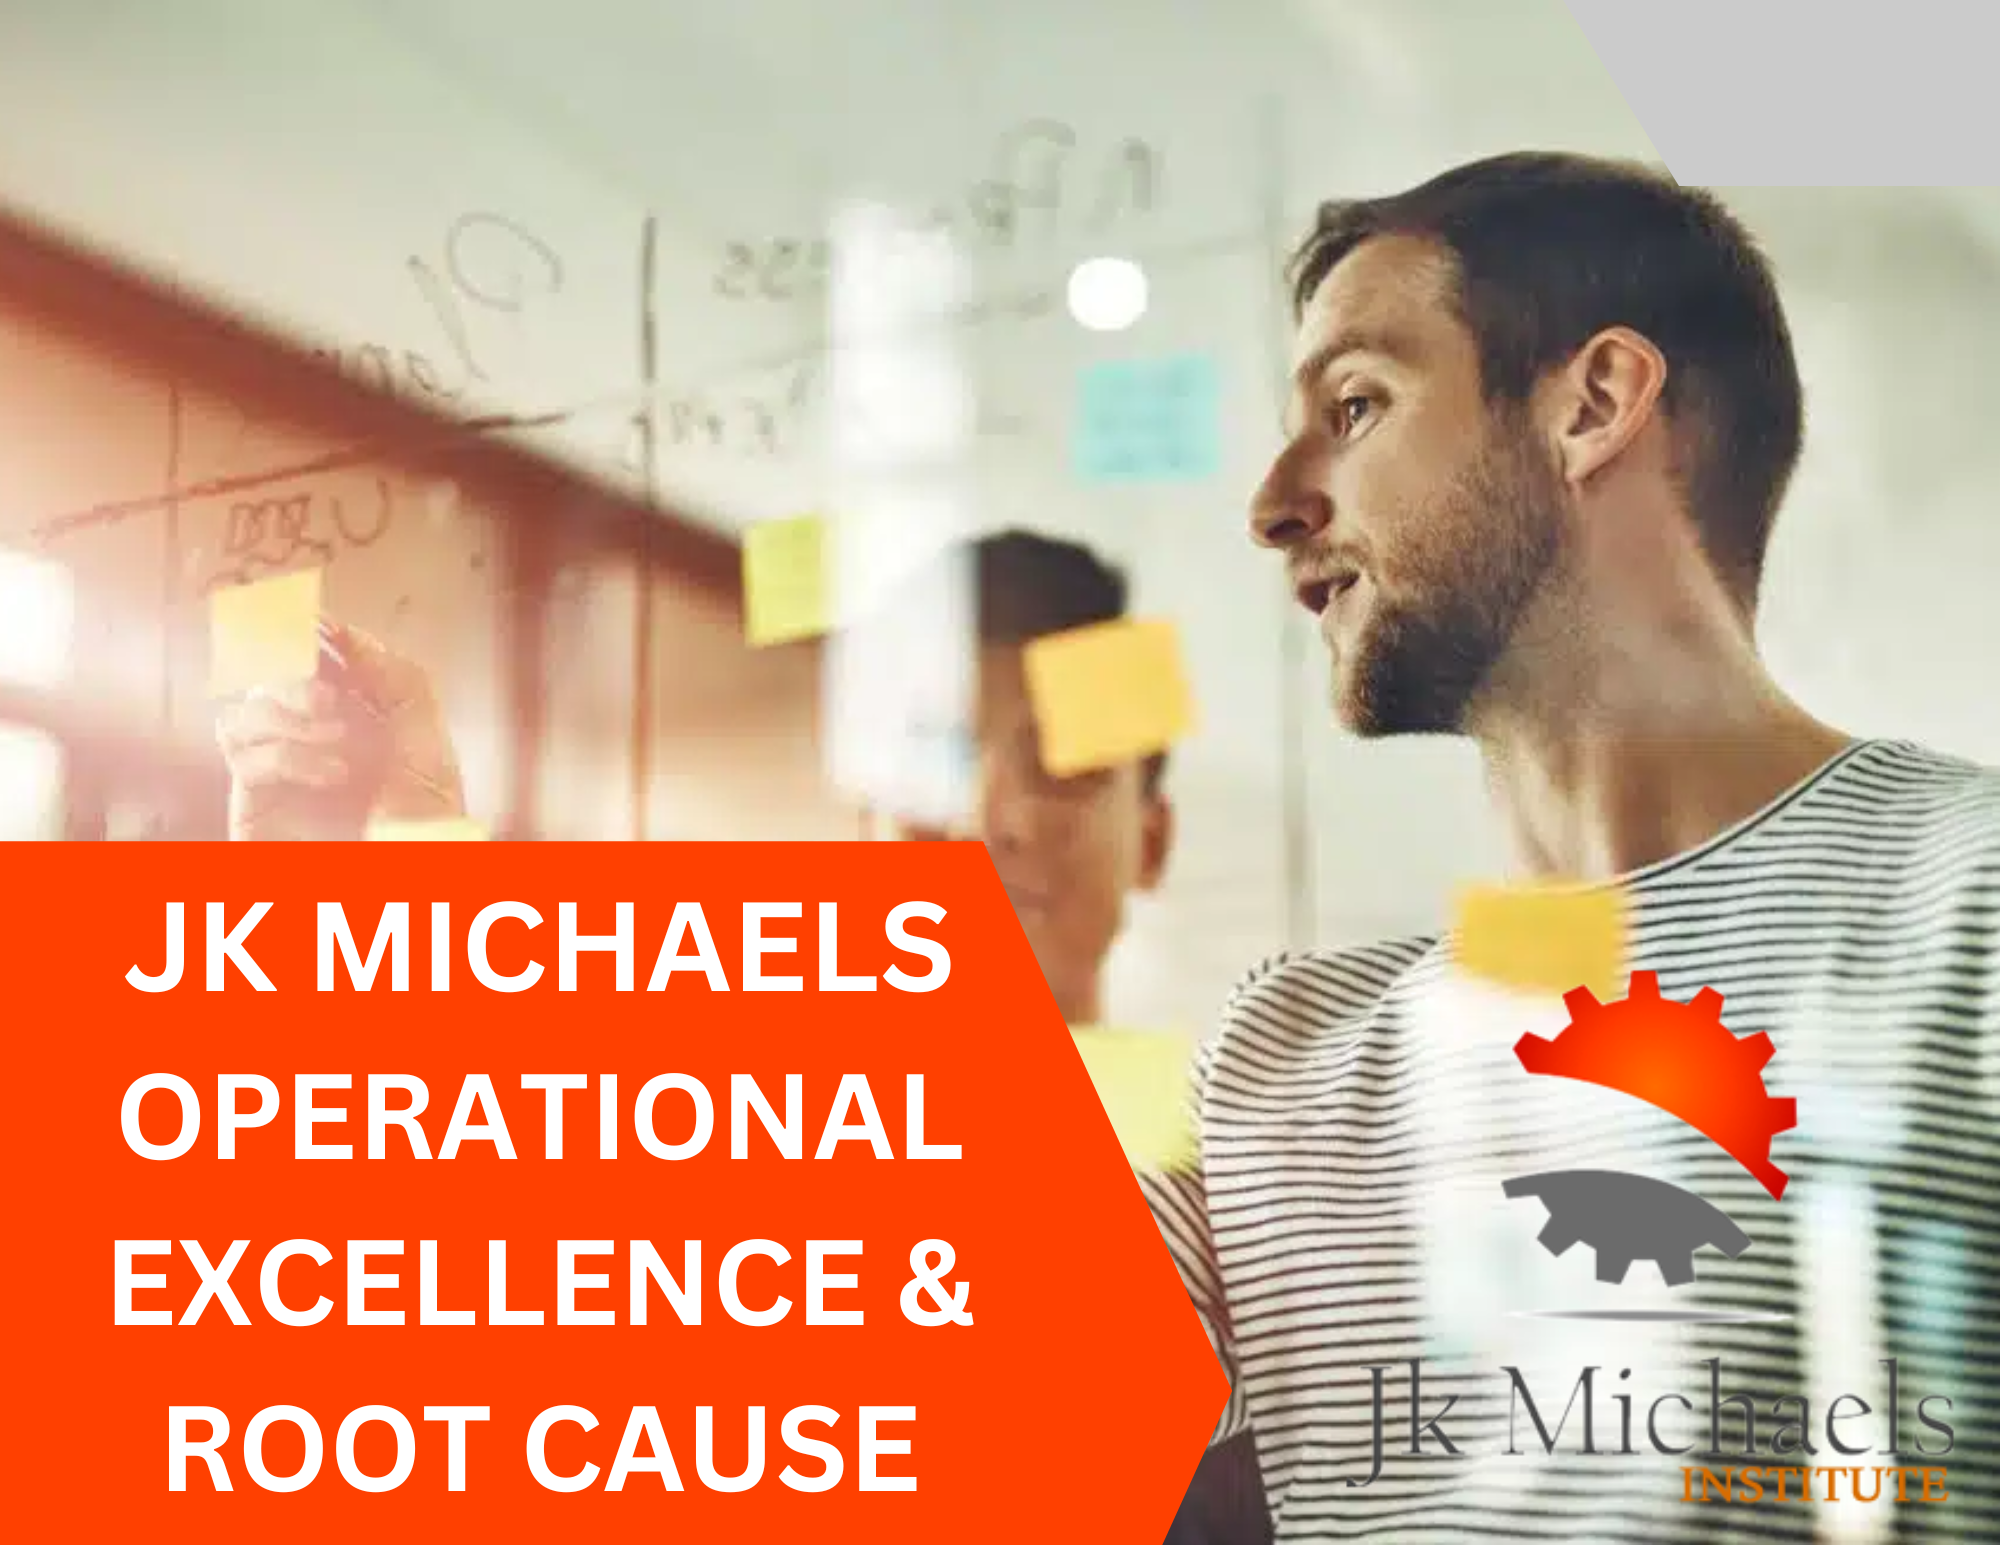 OPERATIONAL EXCELLENCE & ROOT CAUSE